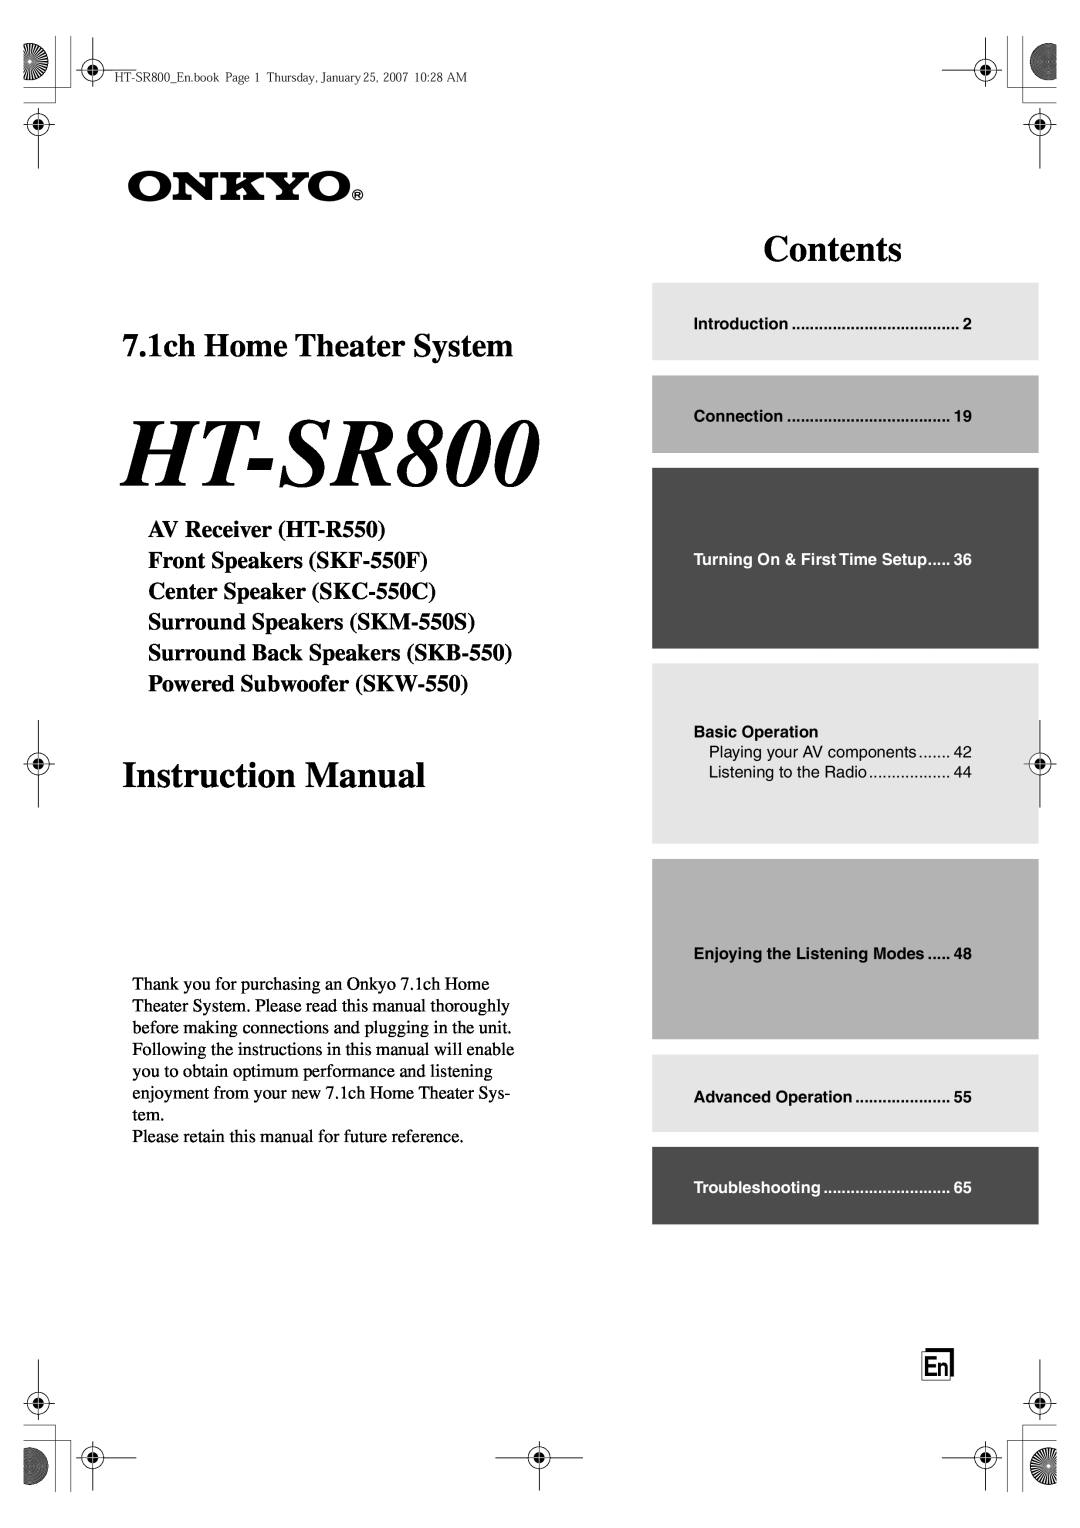 Onkyo HT-SR800 instruction manual Contents, 7.1ch Home Theater System, AV Receiver HT-R550 Front Speakers SKF-550F 